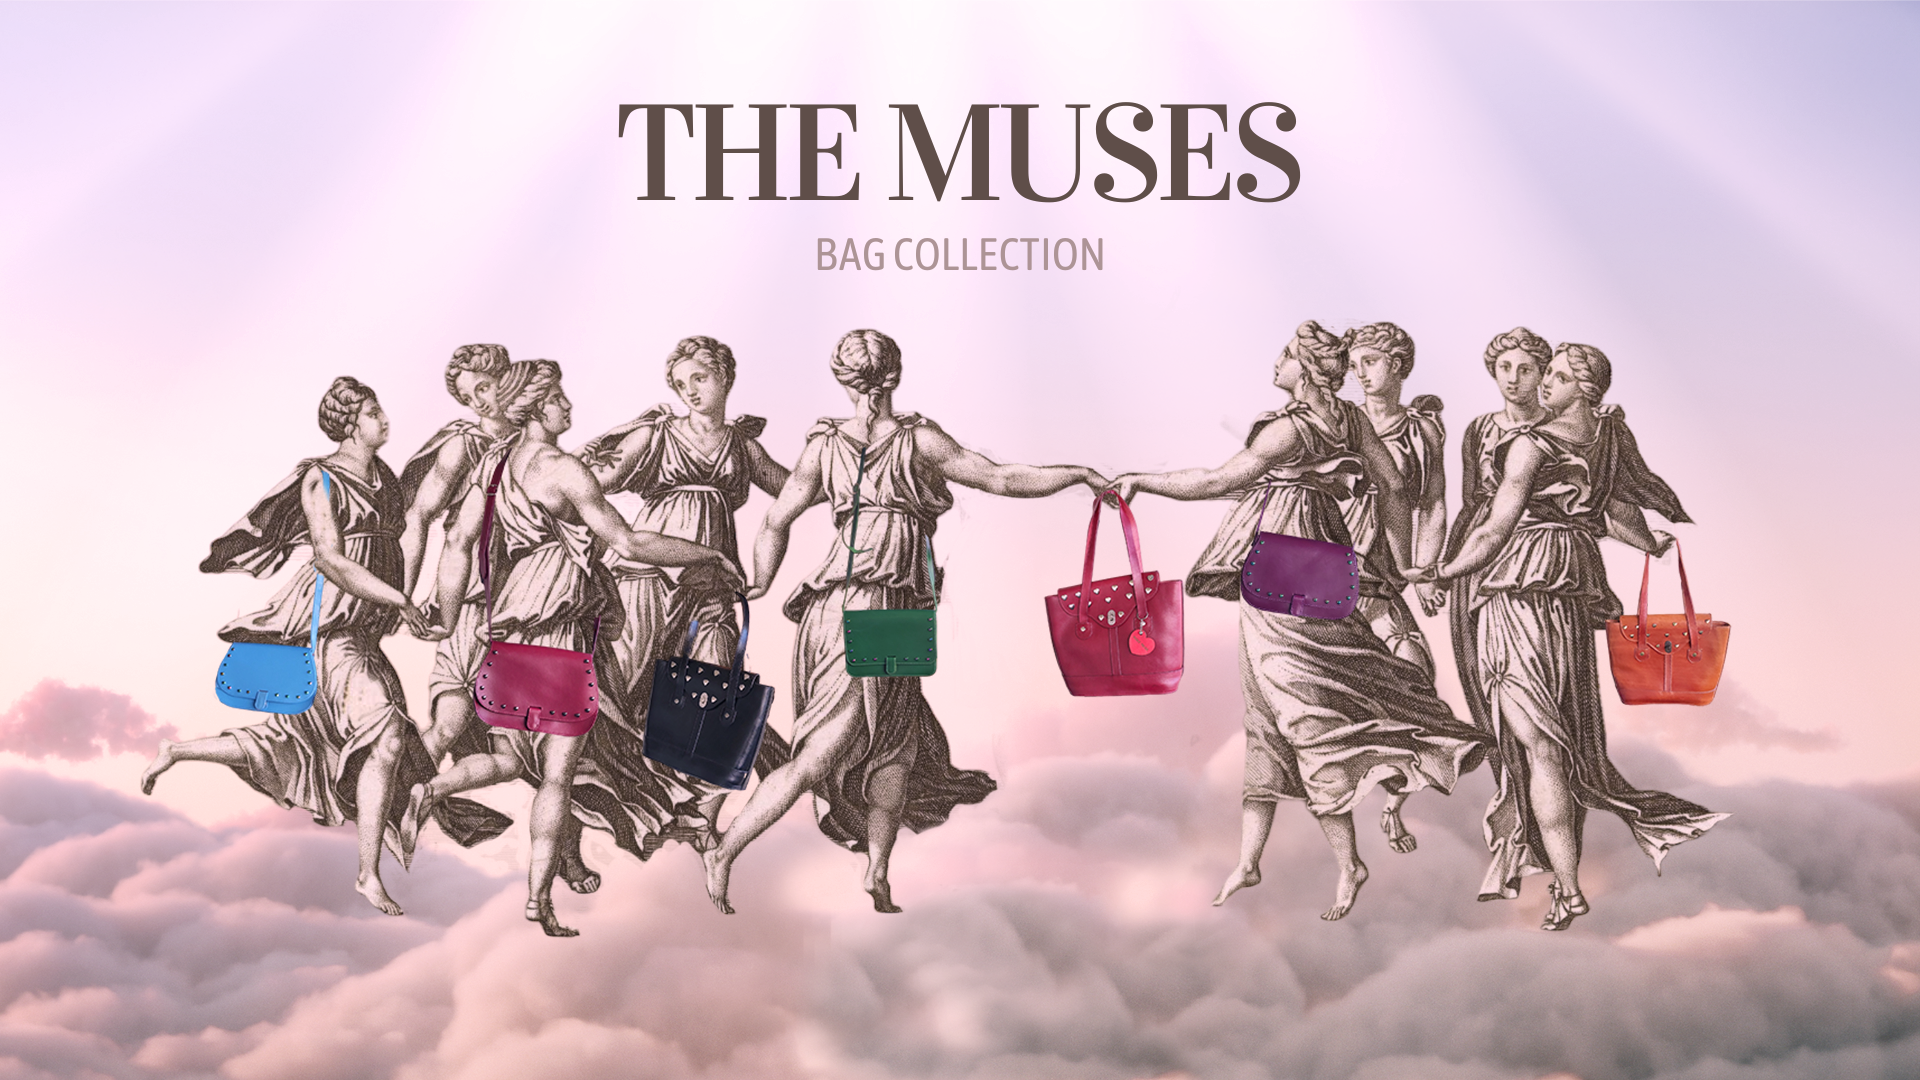 handmade leather bags in vivid colors displayed with dancing muses